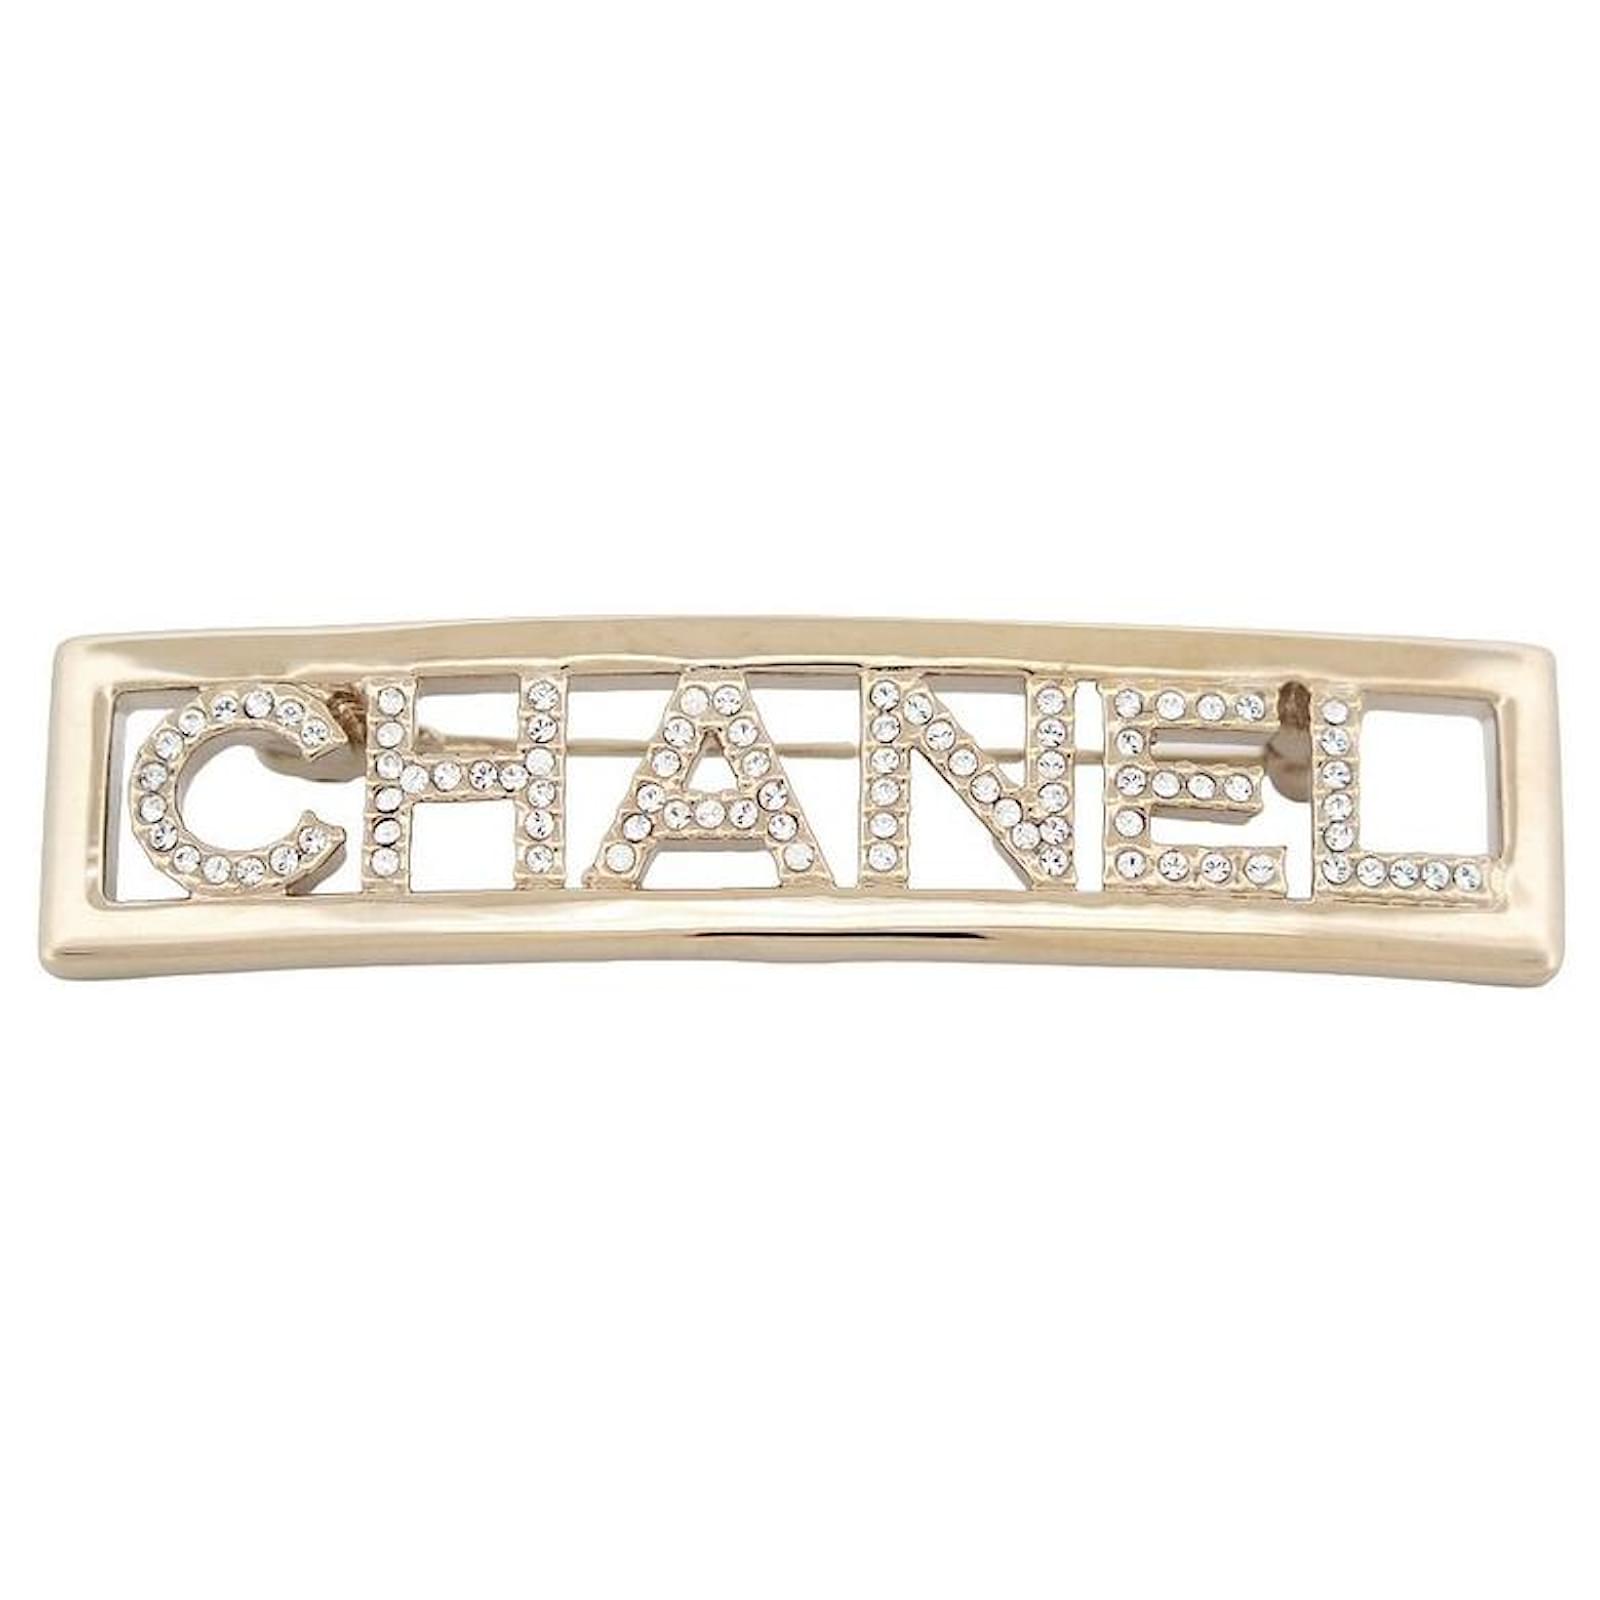 Other Jewelry Chanel New Chanel Brooch Strass Bar in Golden Metal + Box New Golden Brooch